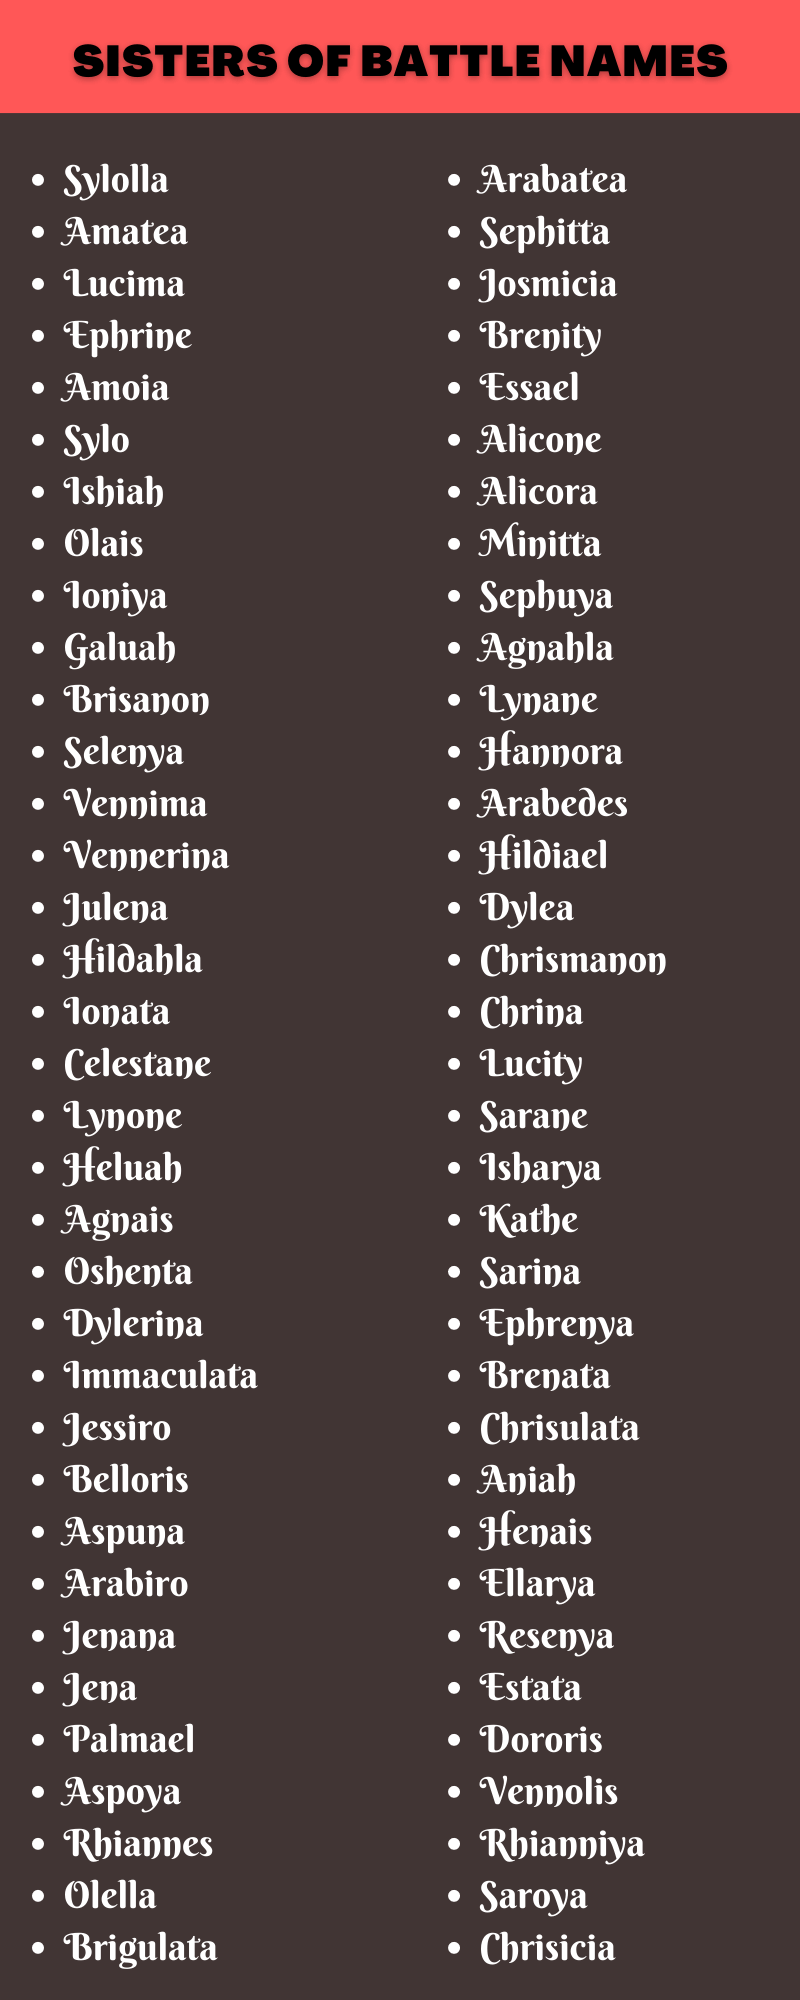 400 Catchy Sisters of Battle Names For You